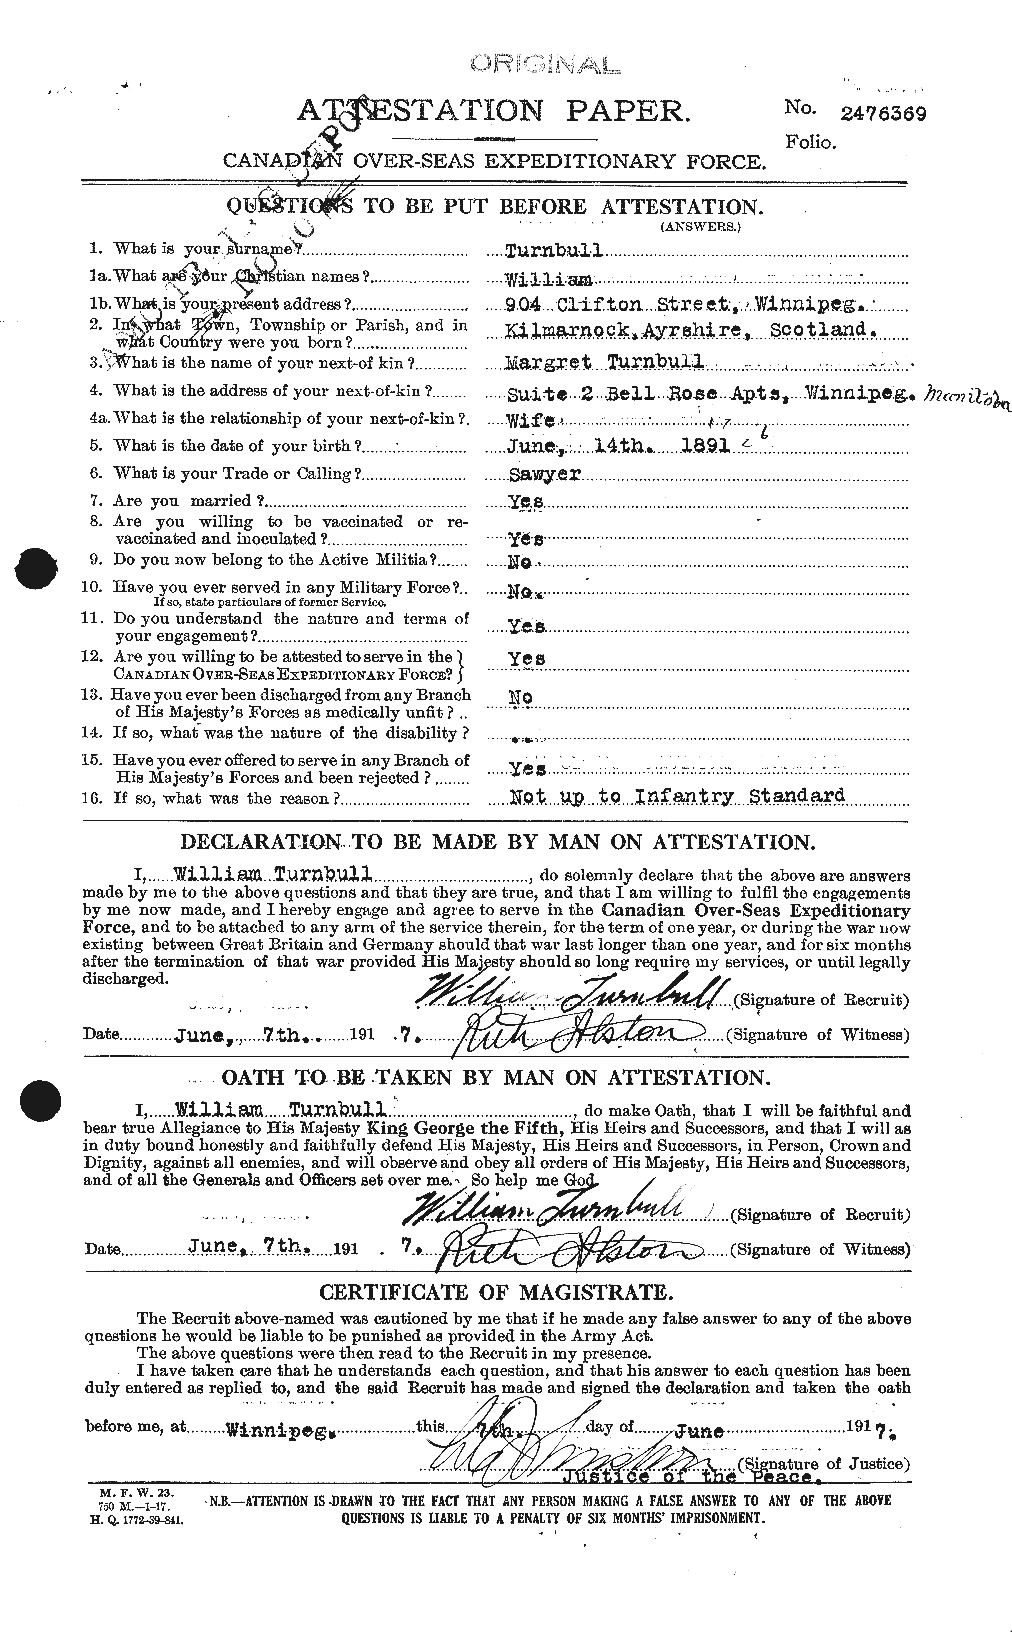 Personnel Records of the First World War - CEF 646170a